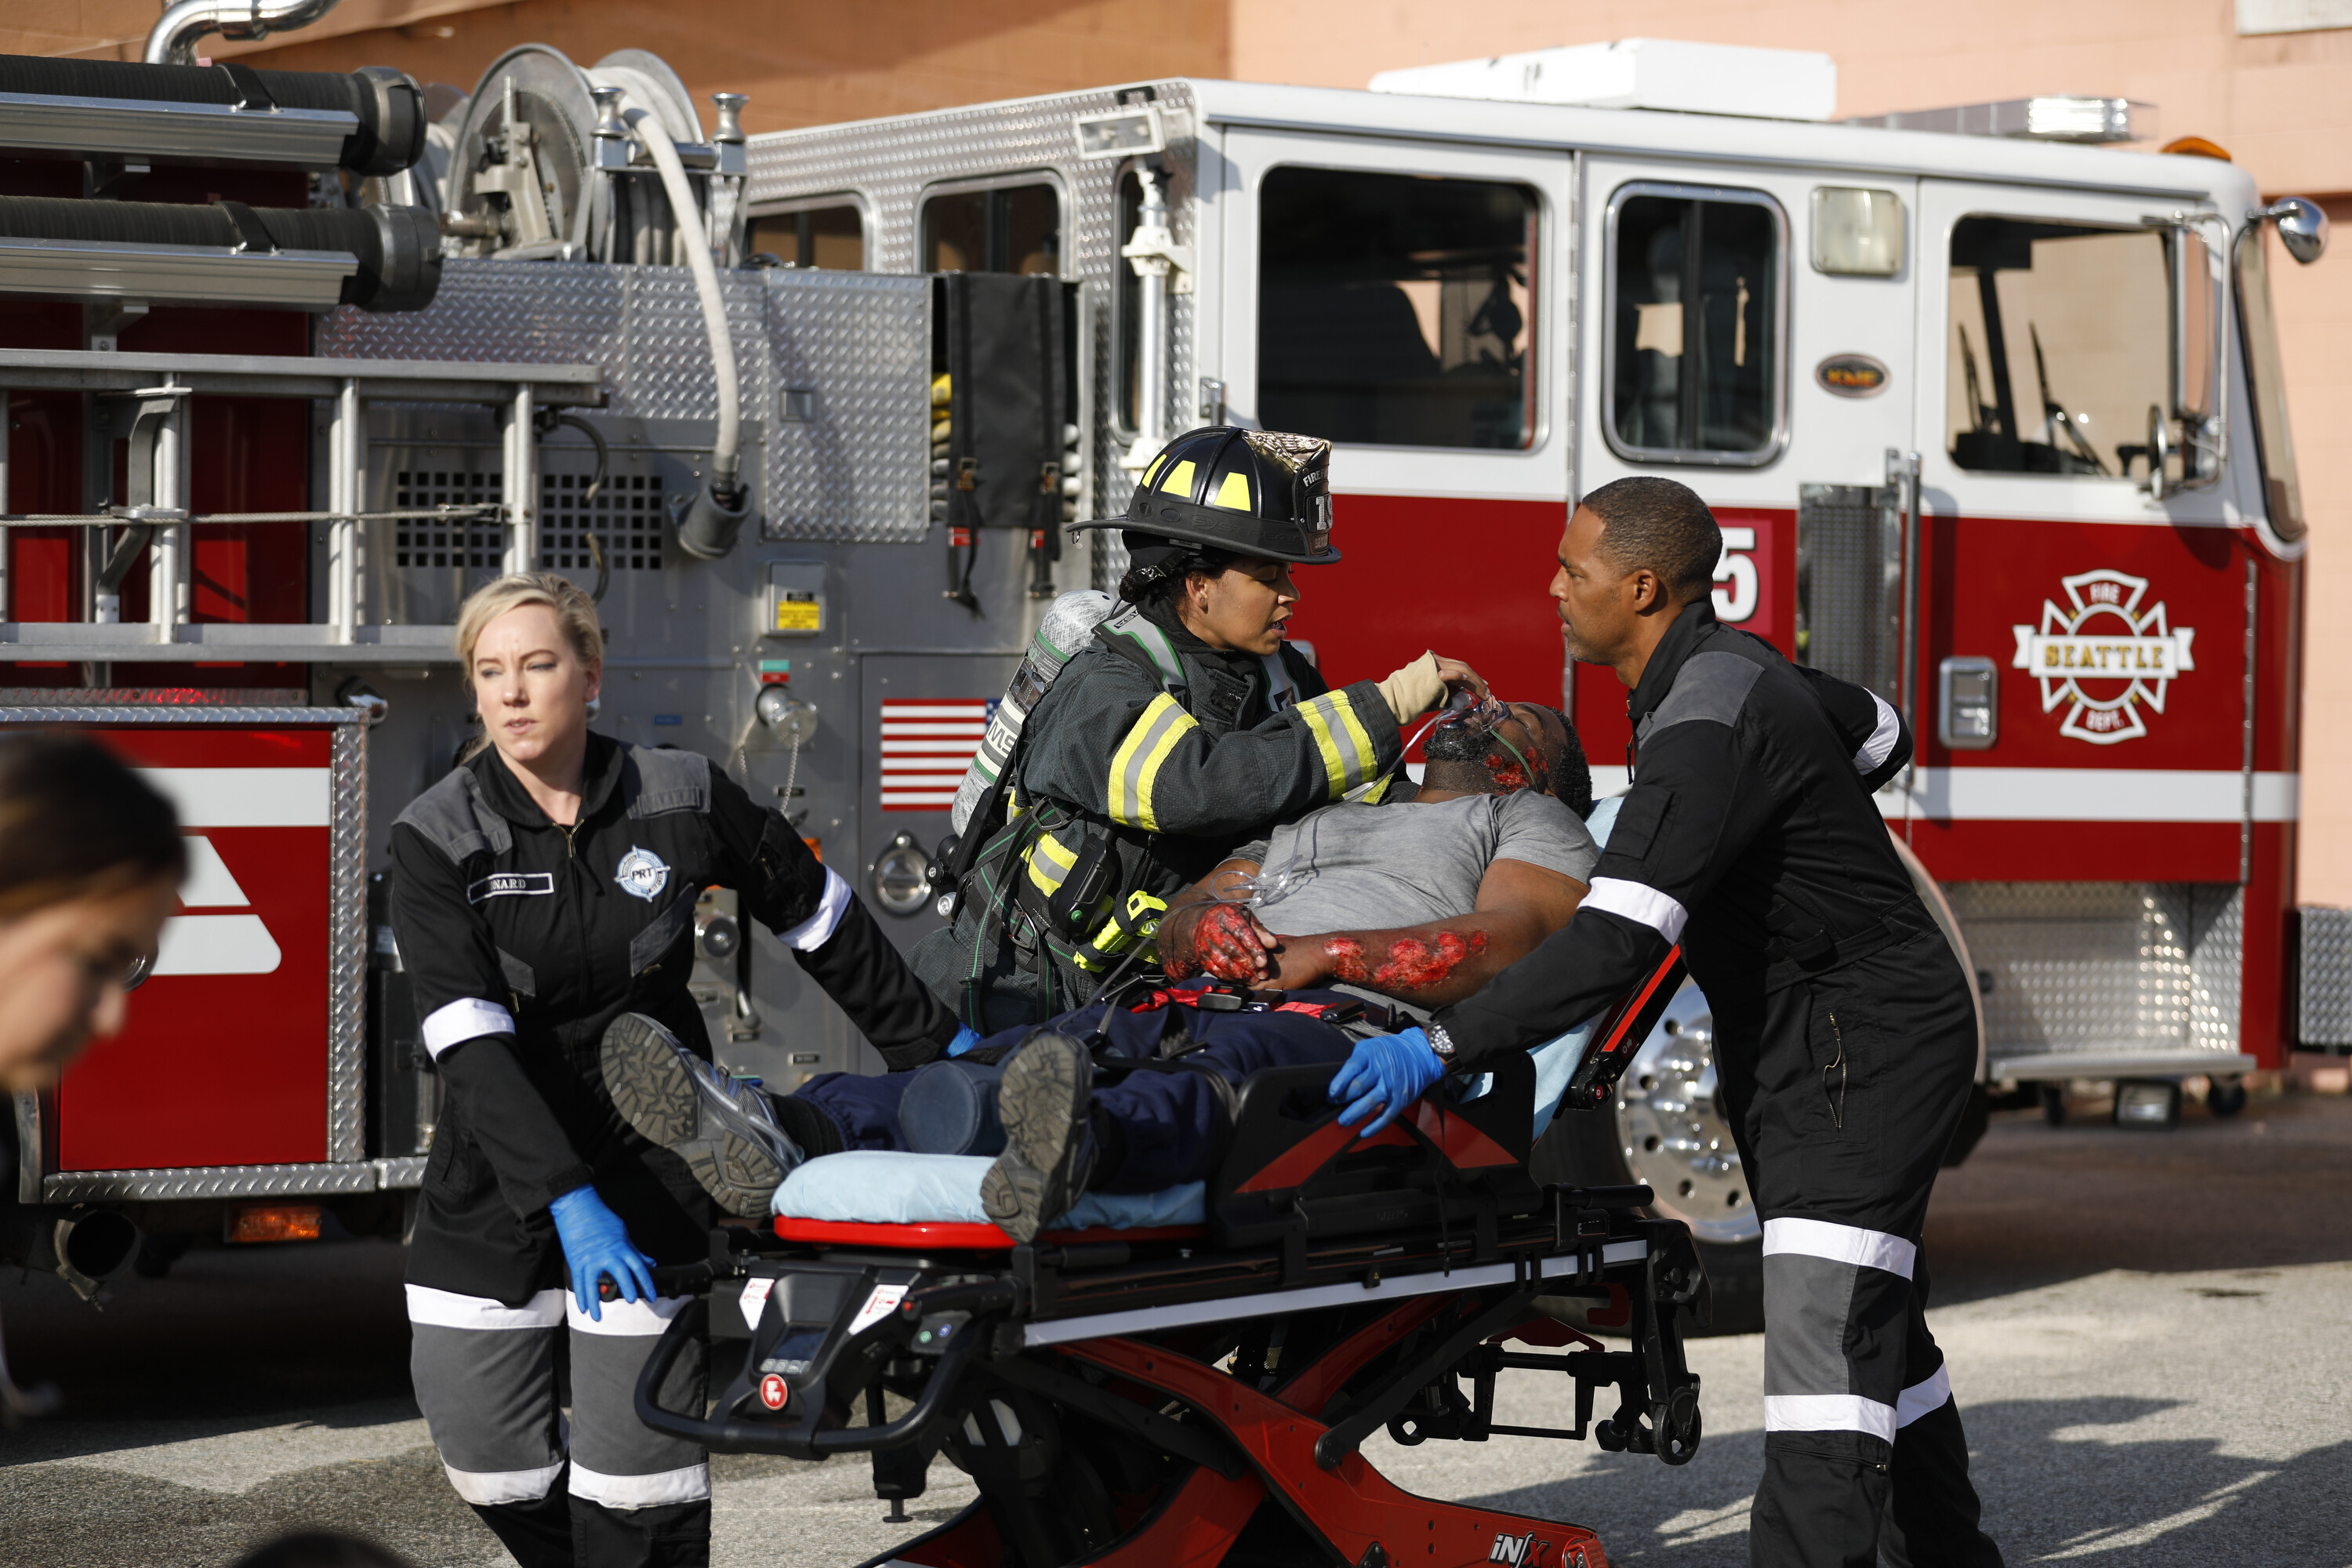 Station 19 (TV Series): Season 3, Rescue Of A Victim Of Fire, Burns On The Skin, Emergency Service, Seattle, Grey's Anatomy Universe. 3000x2000 HD Background.